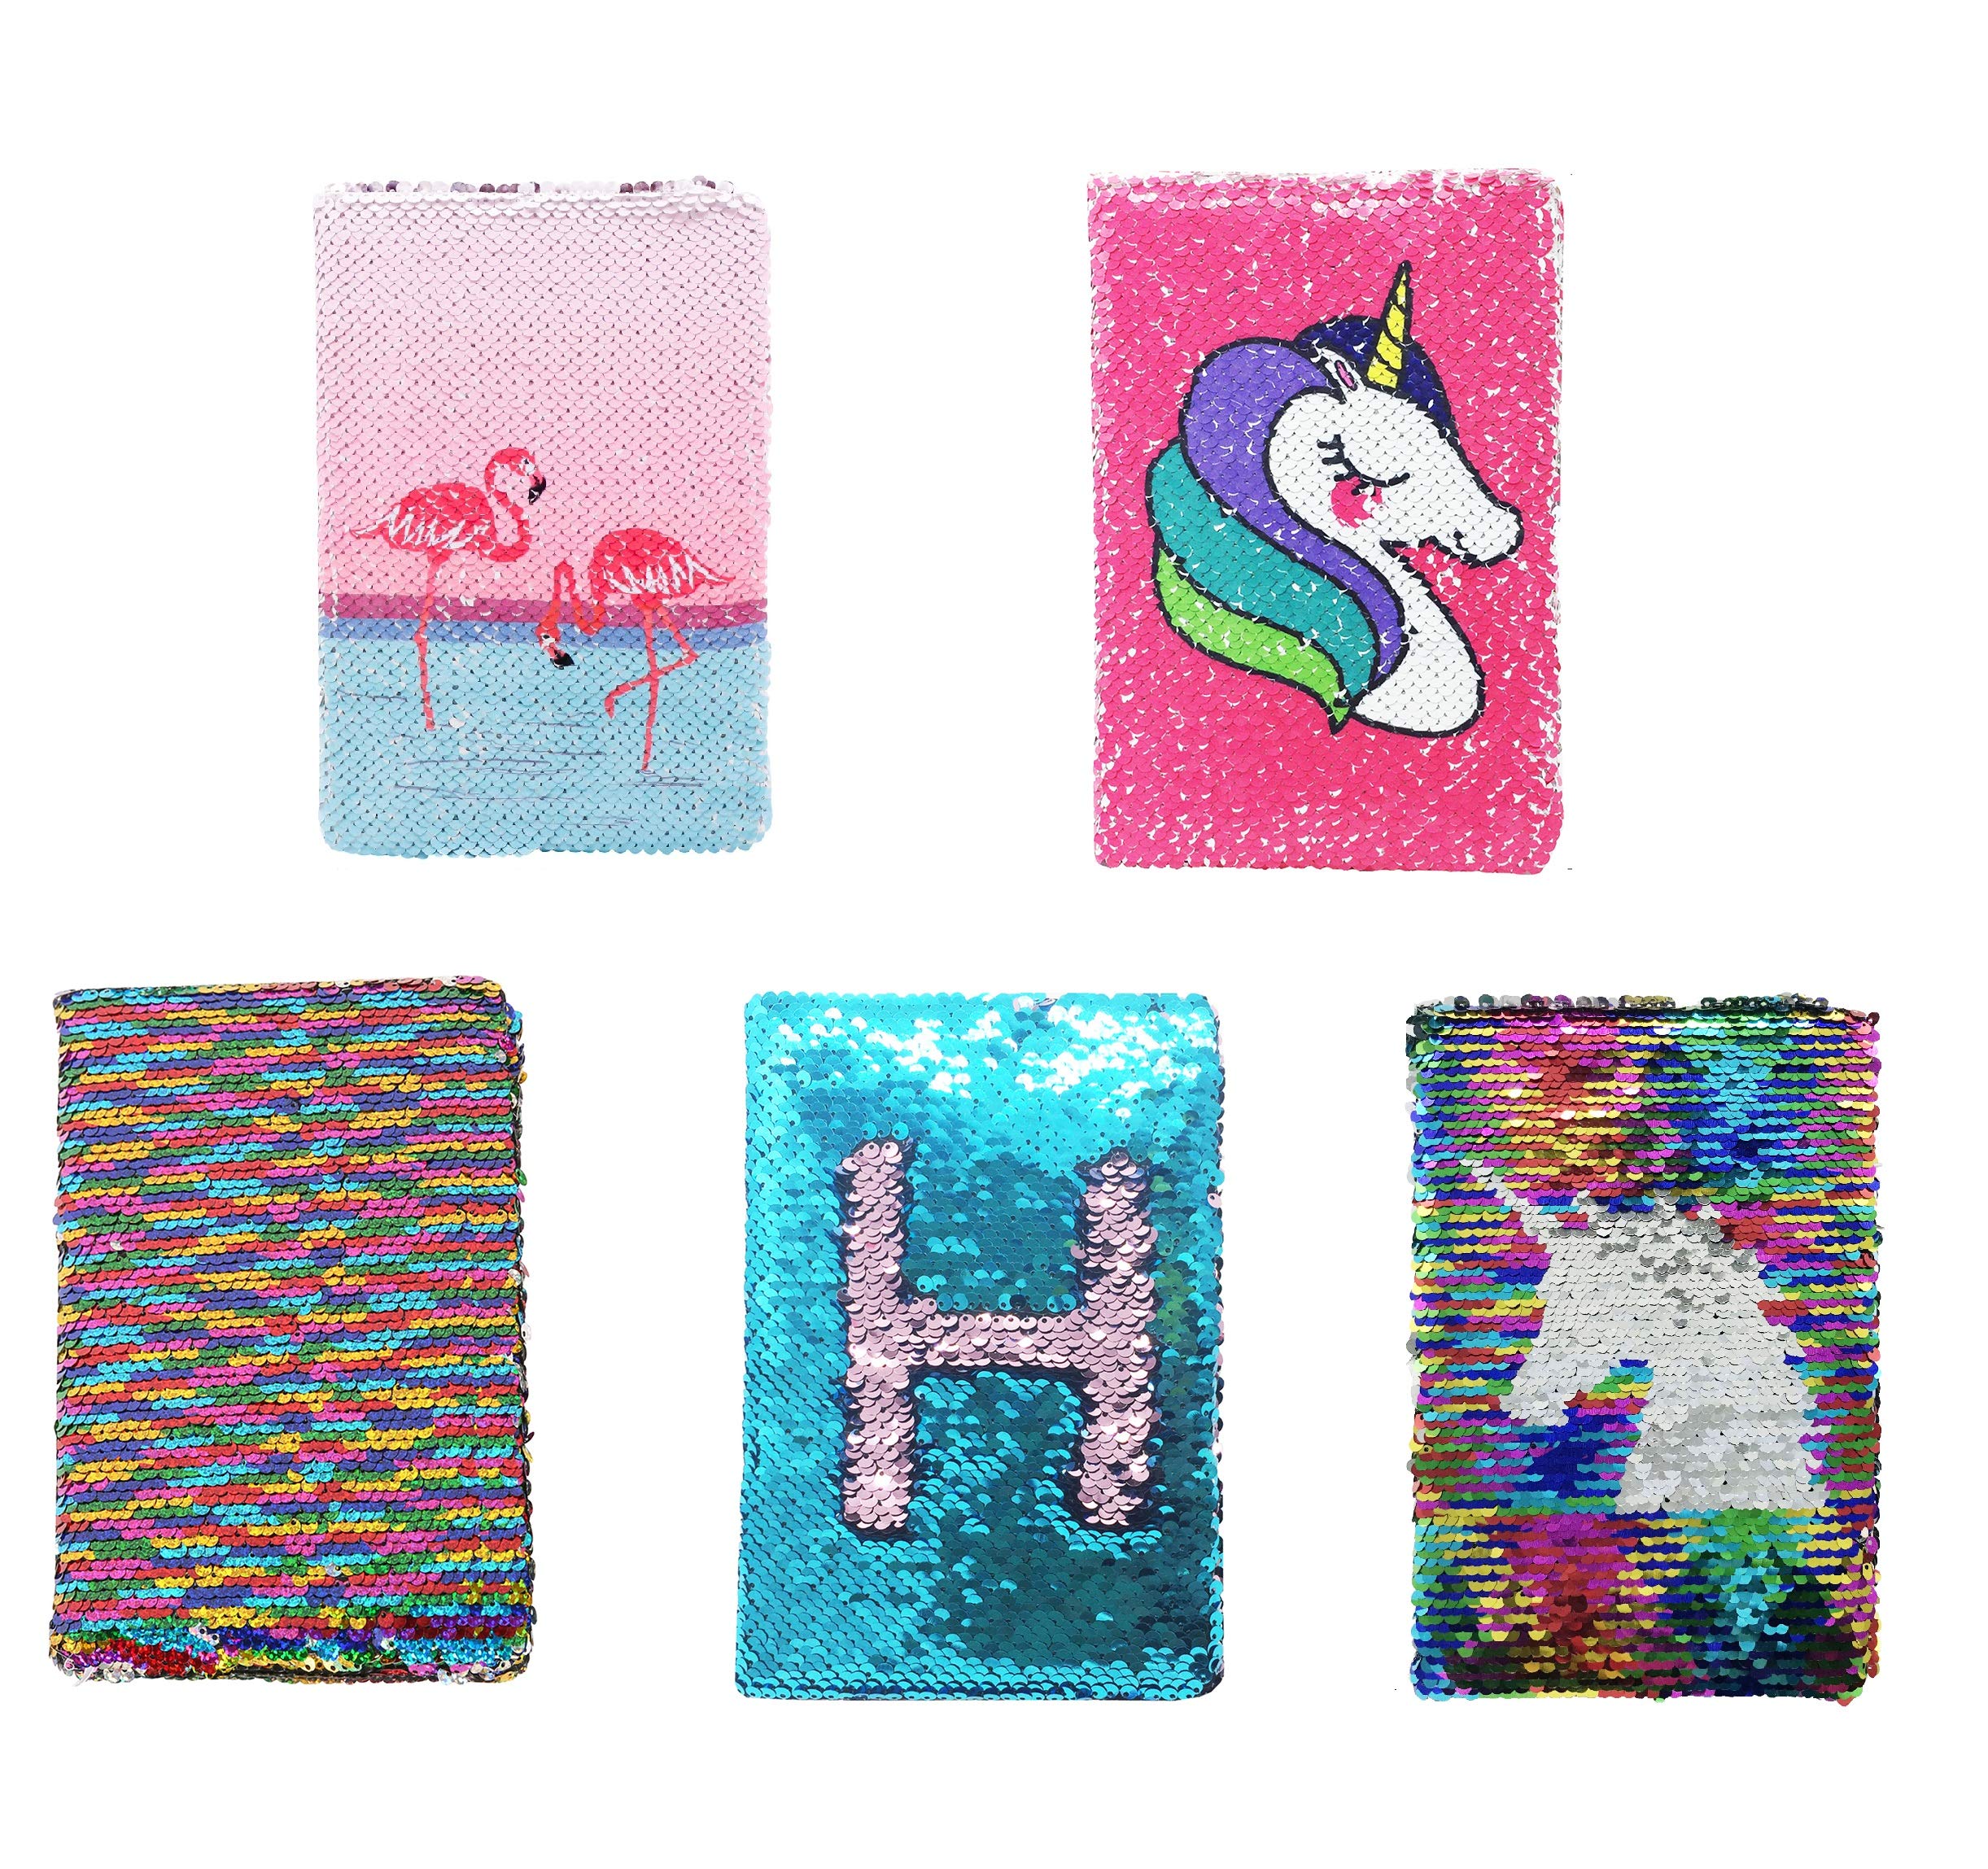 Exerz Reversible Sequin Notebook A5 Size - Rainbow